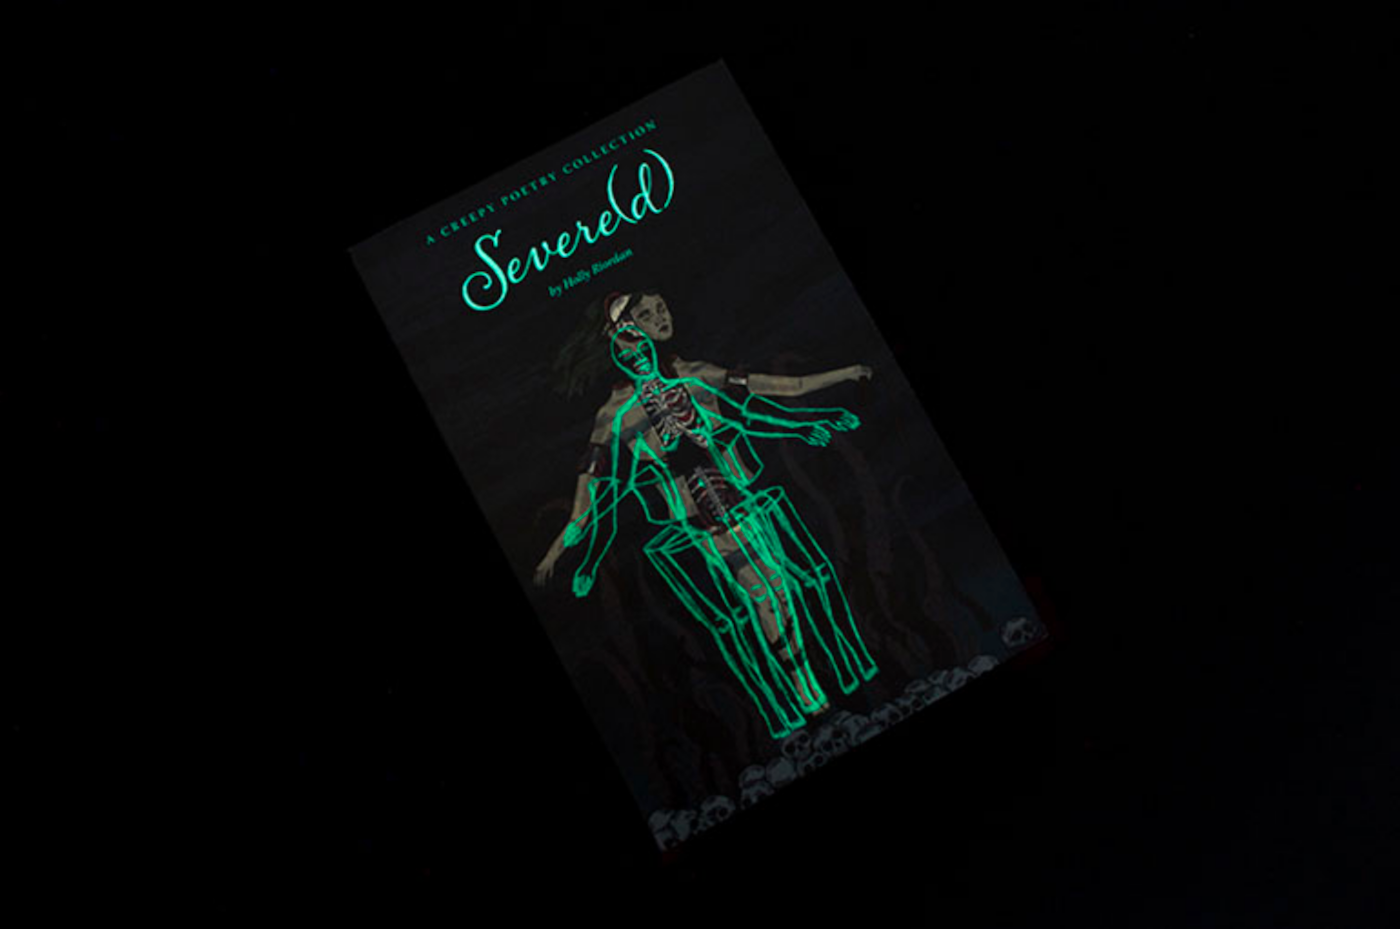 Severe(d): A Creepy Poetry Collection - PaperSpecs